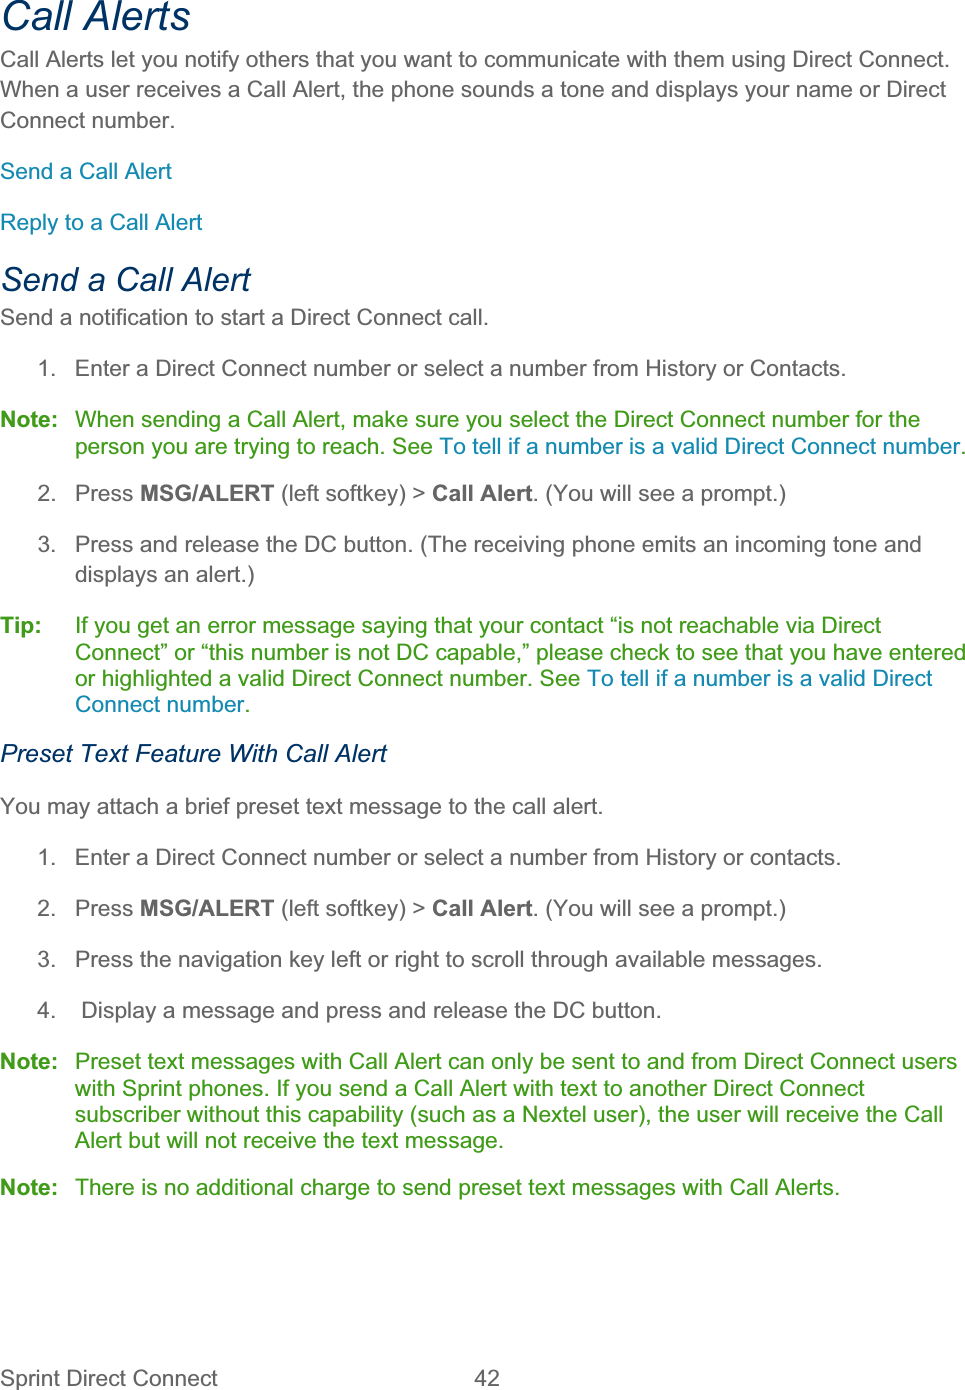 Sprint Direct Connect  42   Call Alerts Call Alerts let you notify others that you want to communicate with them using Direct Connect. When a user receives a Call Alert, the phone sounds a tone and displays your name or Direct Connect number. Send a Call Alert Reply to a Call Alert Send a Call Alert Send a notification to start a Direct Connect call.  1.  Enter a Direct Connect number or select a number from History or Contacts. Note:  When sending a Call Alert, make sure you select the Direct Connect number for the person you are trying to reach. See To tell if a number is a valid Direct Connect number.2. Press MSG/ALERT (left softkey) &gt; Call Alert. (You will see a prompt.) 3.  Press and release the DC button. (The receiving phone emits an incoming tone and displays an alert.) Tip:   If you get an error message saying that your contact “is not reachable via Direct Connect” or “this number is not DC capable,” please check to see that you have entered or highlighted a valid Direct Connect number. See To tell if a number is a valid Direct Connect number.Preset Text Feature With Call Alert You may attach a brief preset text message to the call alert. 1.  Enter a Direct Connect number or select a number from History or contacts. 2. Press MSG/ALERT (left softkey) &gt; Call Alert. (You will see a prompt.) 3.  Press the navigation key left or right to scroll through available messages. 4.   Display a message and press and release the DC button. Note:  Preset text messages with Call Alert can only be sent to and from Direct Connect users with Sprint phones. If you send a Call Alert with text to another Direct Connect subscriber without this capability (such as a Nextel user), the user will receive the Call Alert but will not receive the text message. Note:  There is no additional charge to send preset text messages with Call Alerts. 